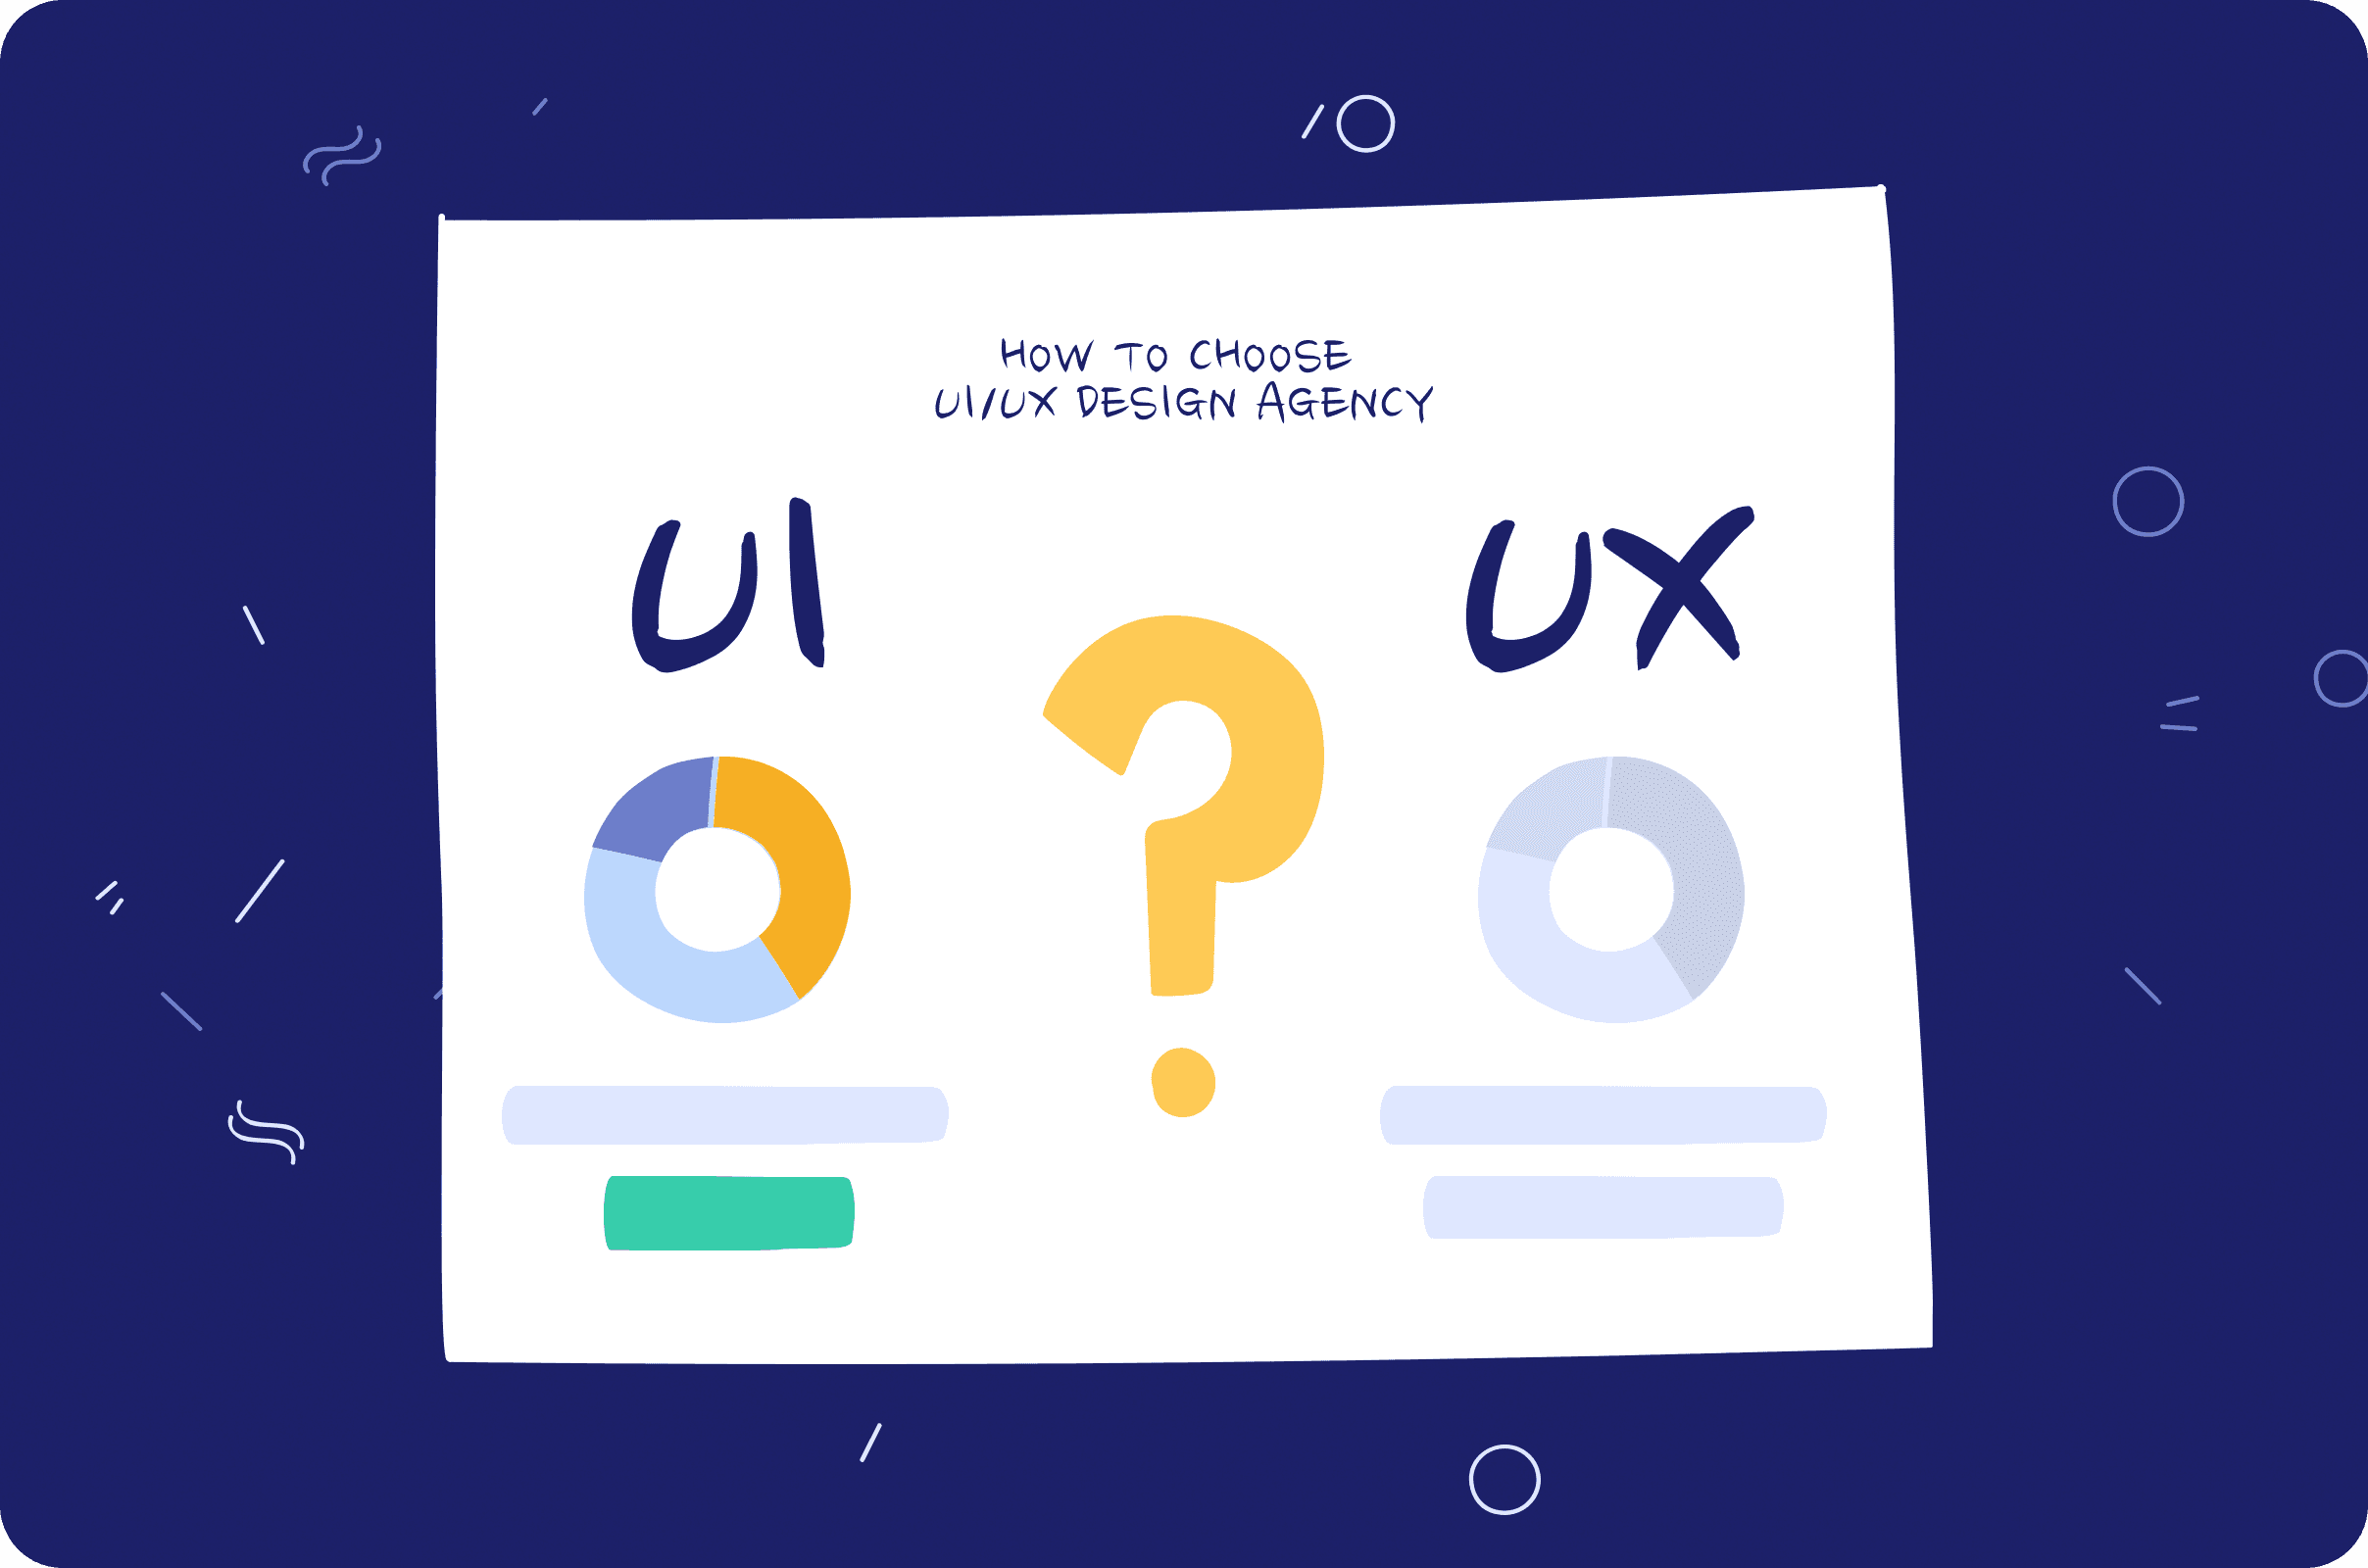 How to choose a UI/UX design agency